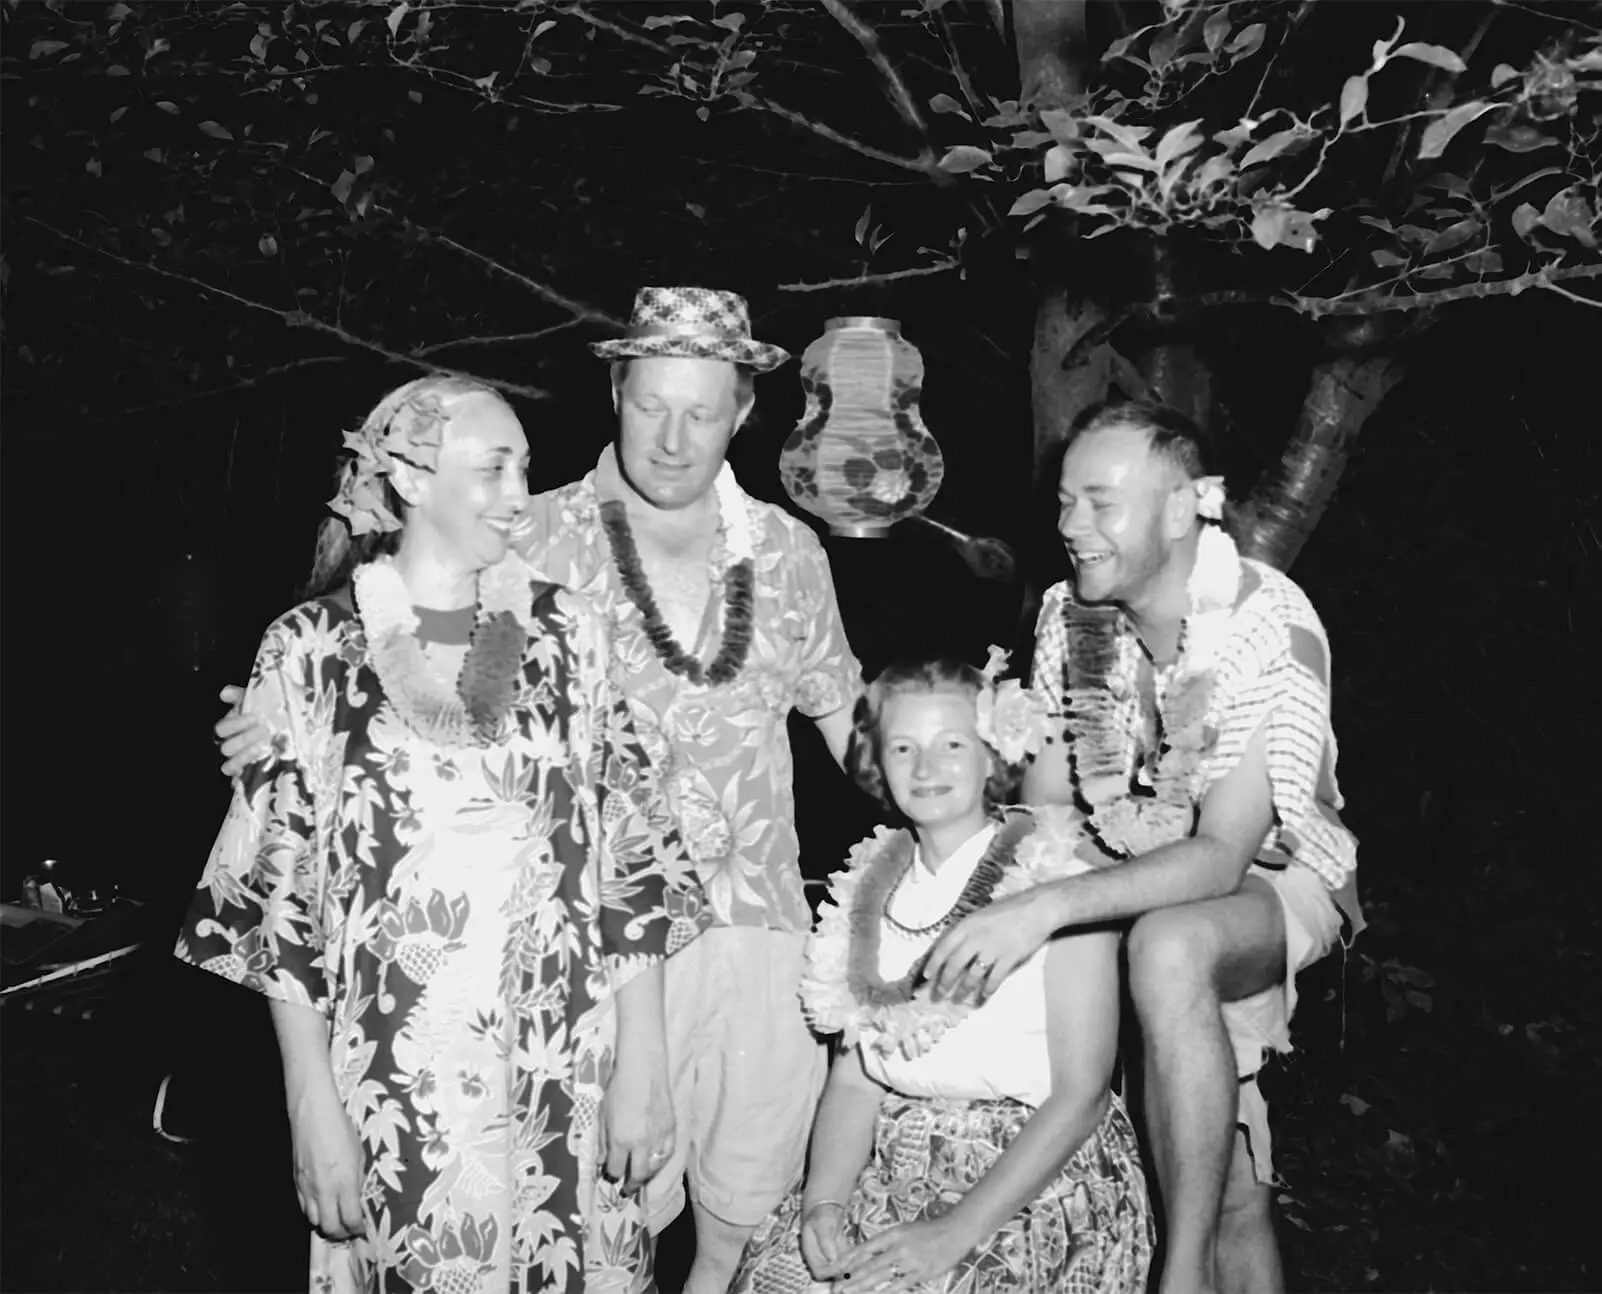 Two men and two women dressed in floral shirts and wearing leis.